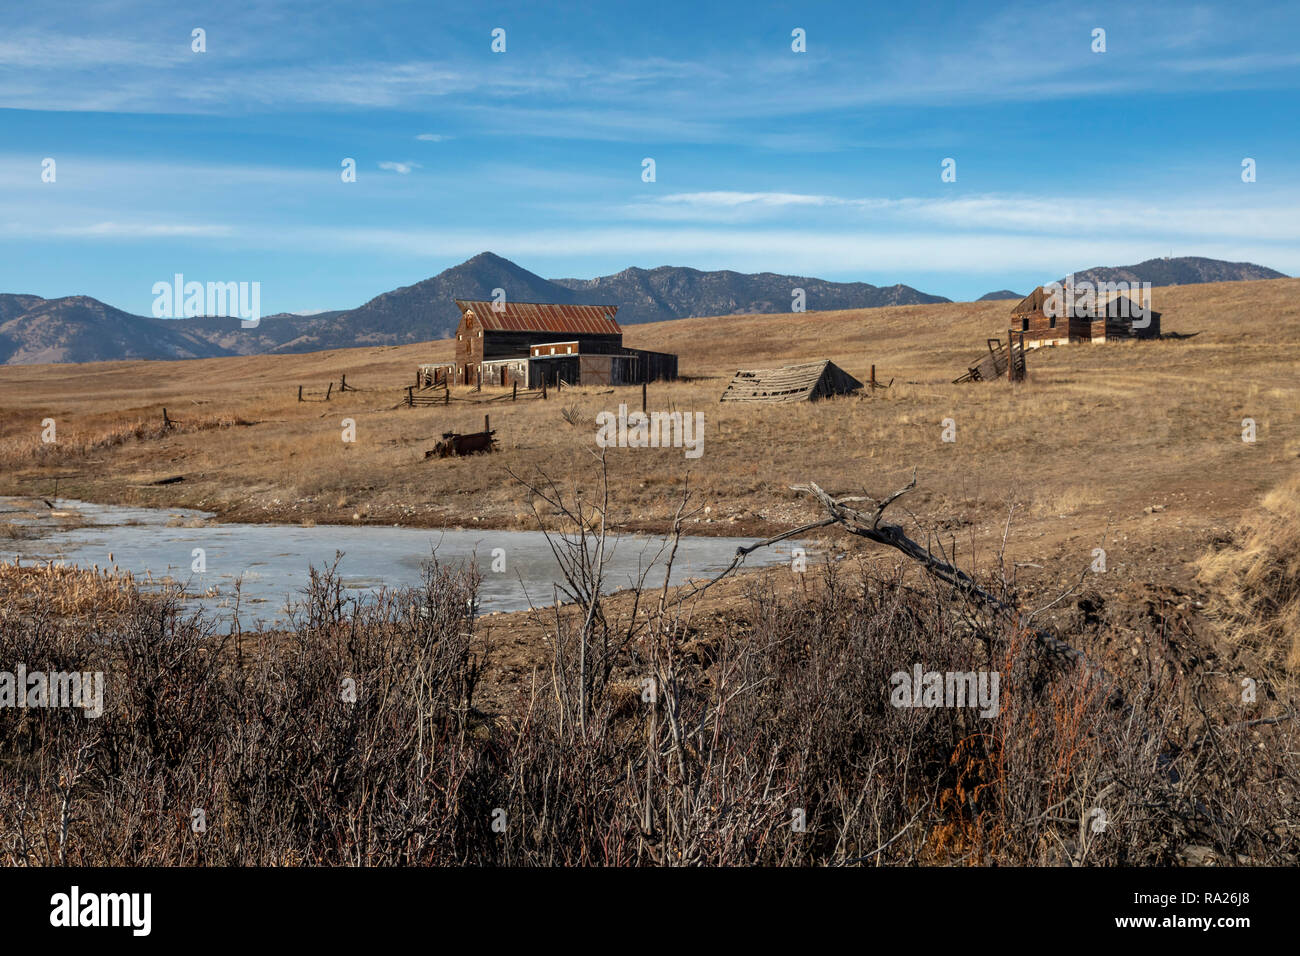 Denver, Colorado - The Lindsay Ranch in the Rocky Flats National Wildlife Refuge,. The ranch operated until 1951 when the government bought it to cons Stock Photo